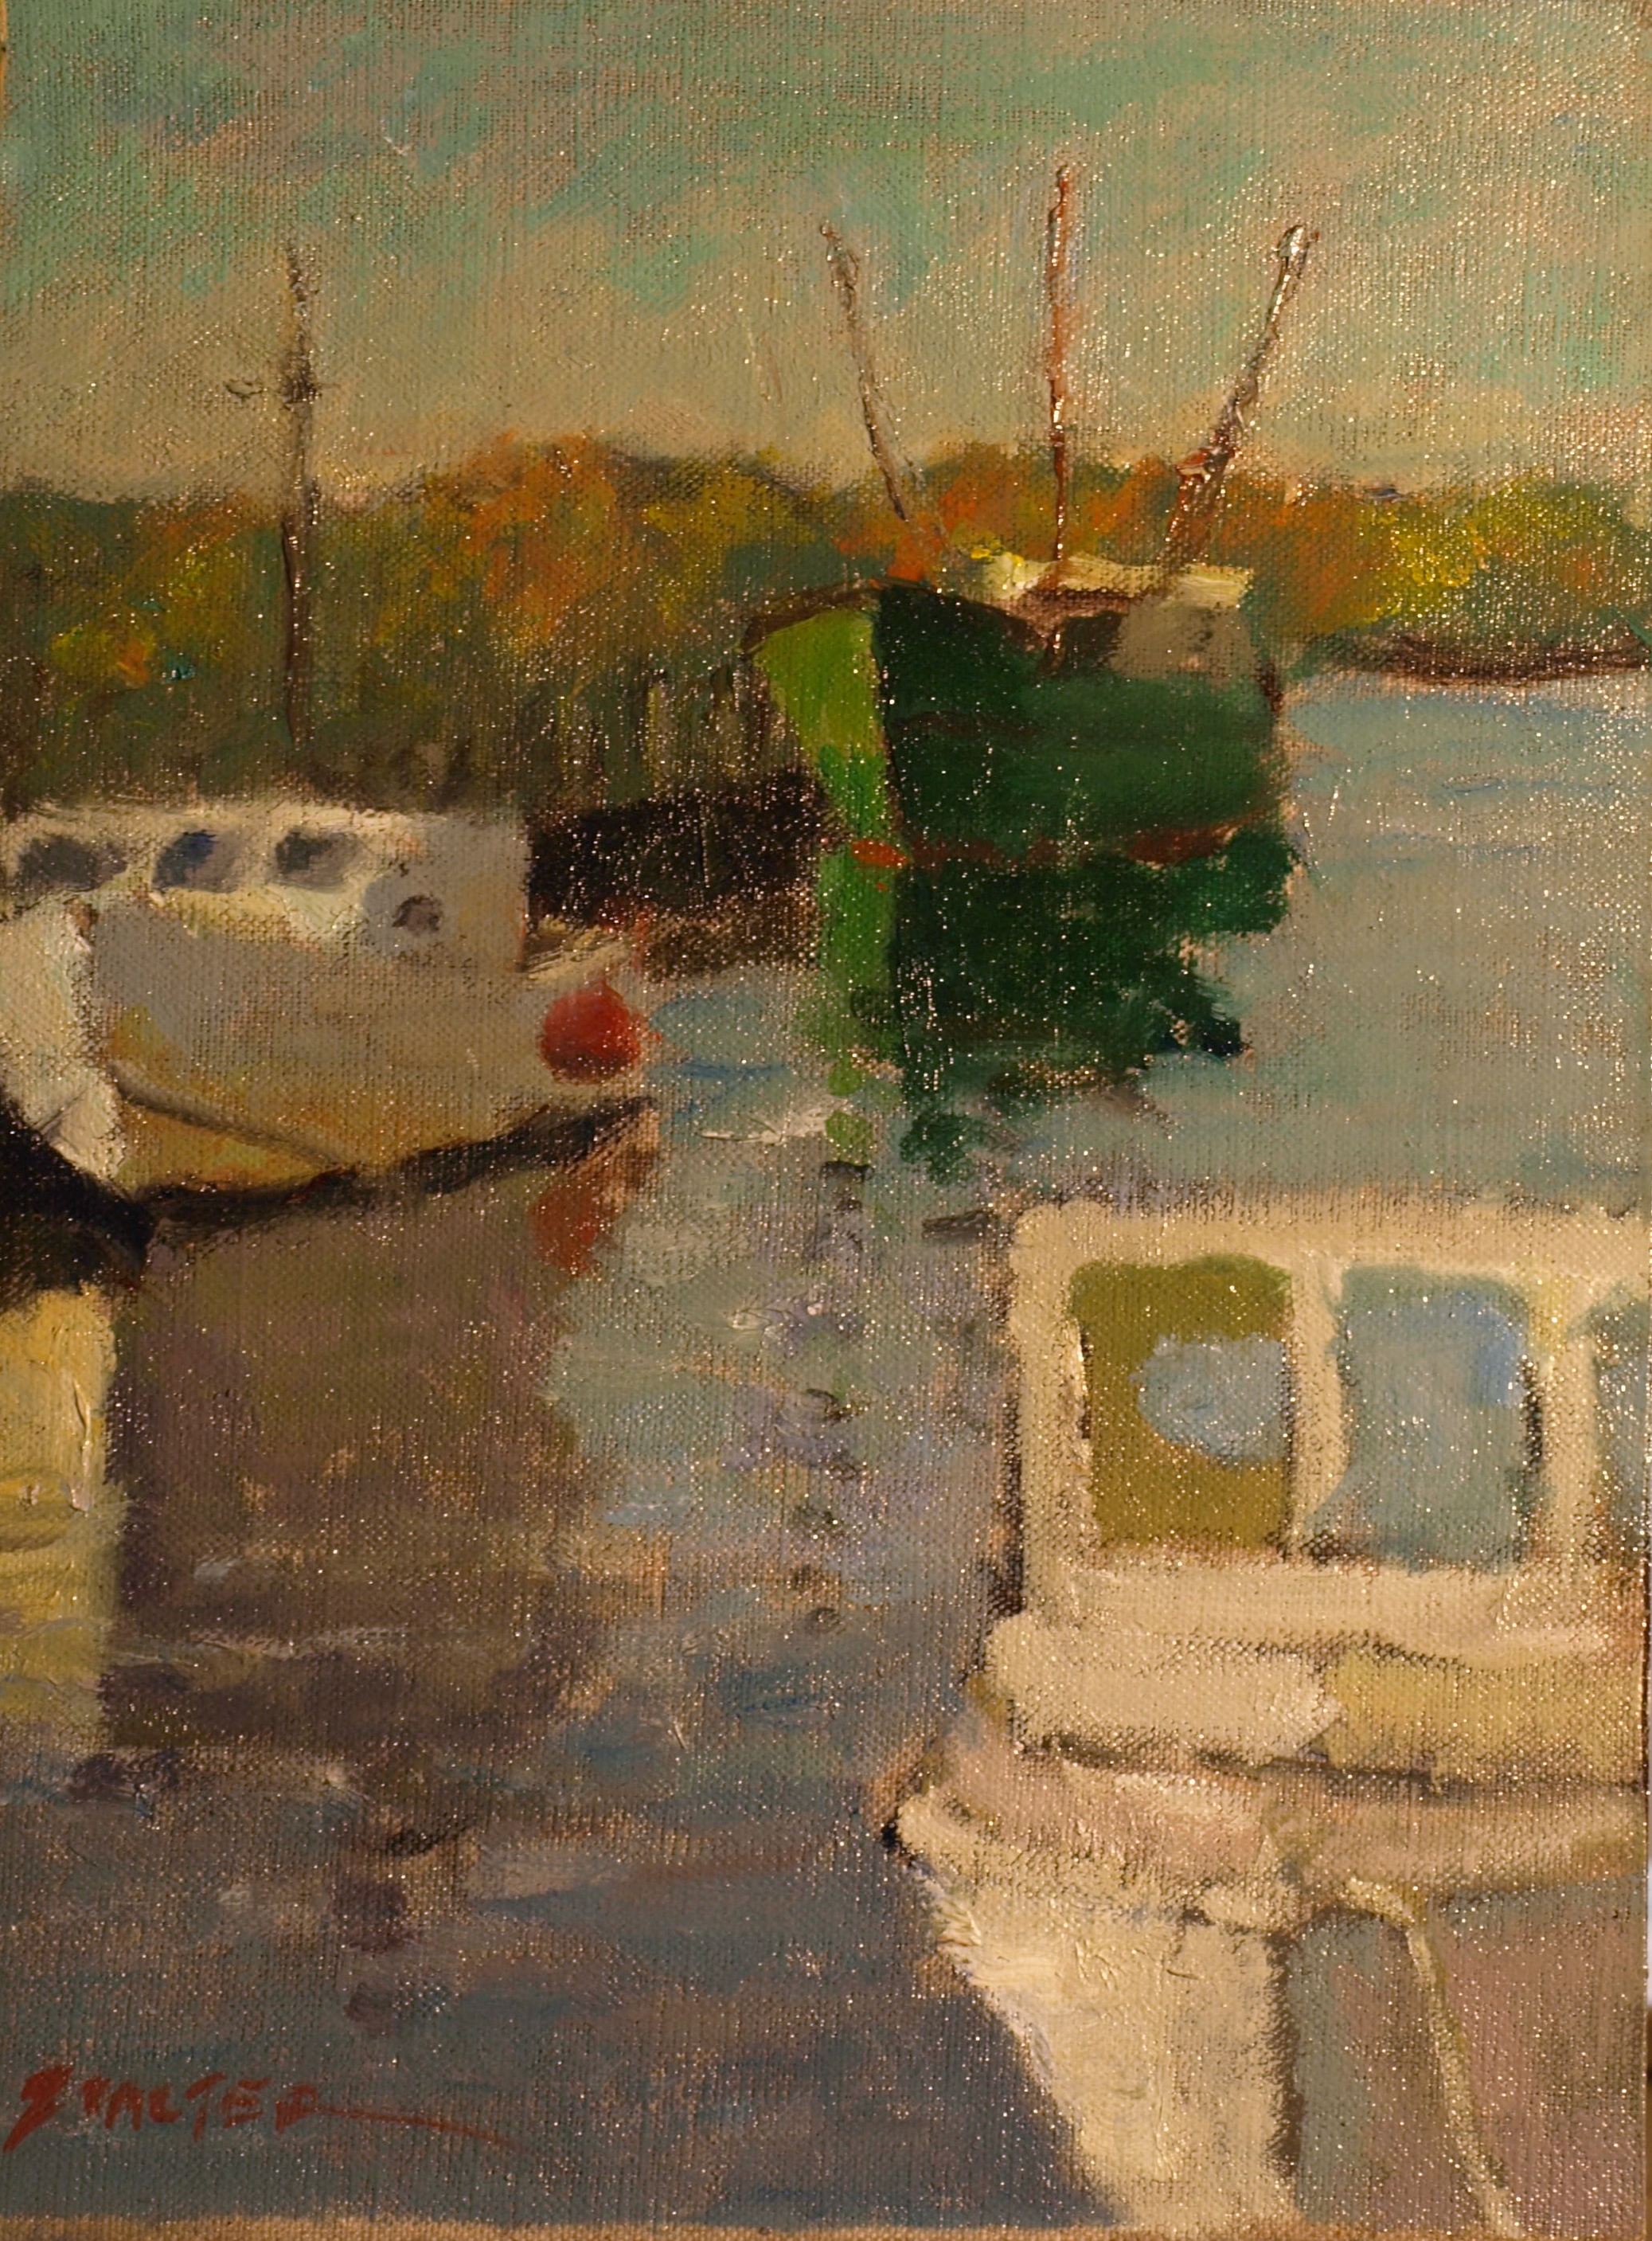 Harbor Scene, Oil on Canvas on Panel, 12 x 9 Inches, by Richard Stalter, $225